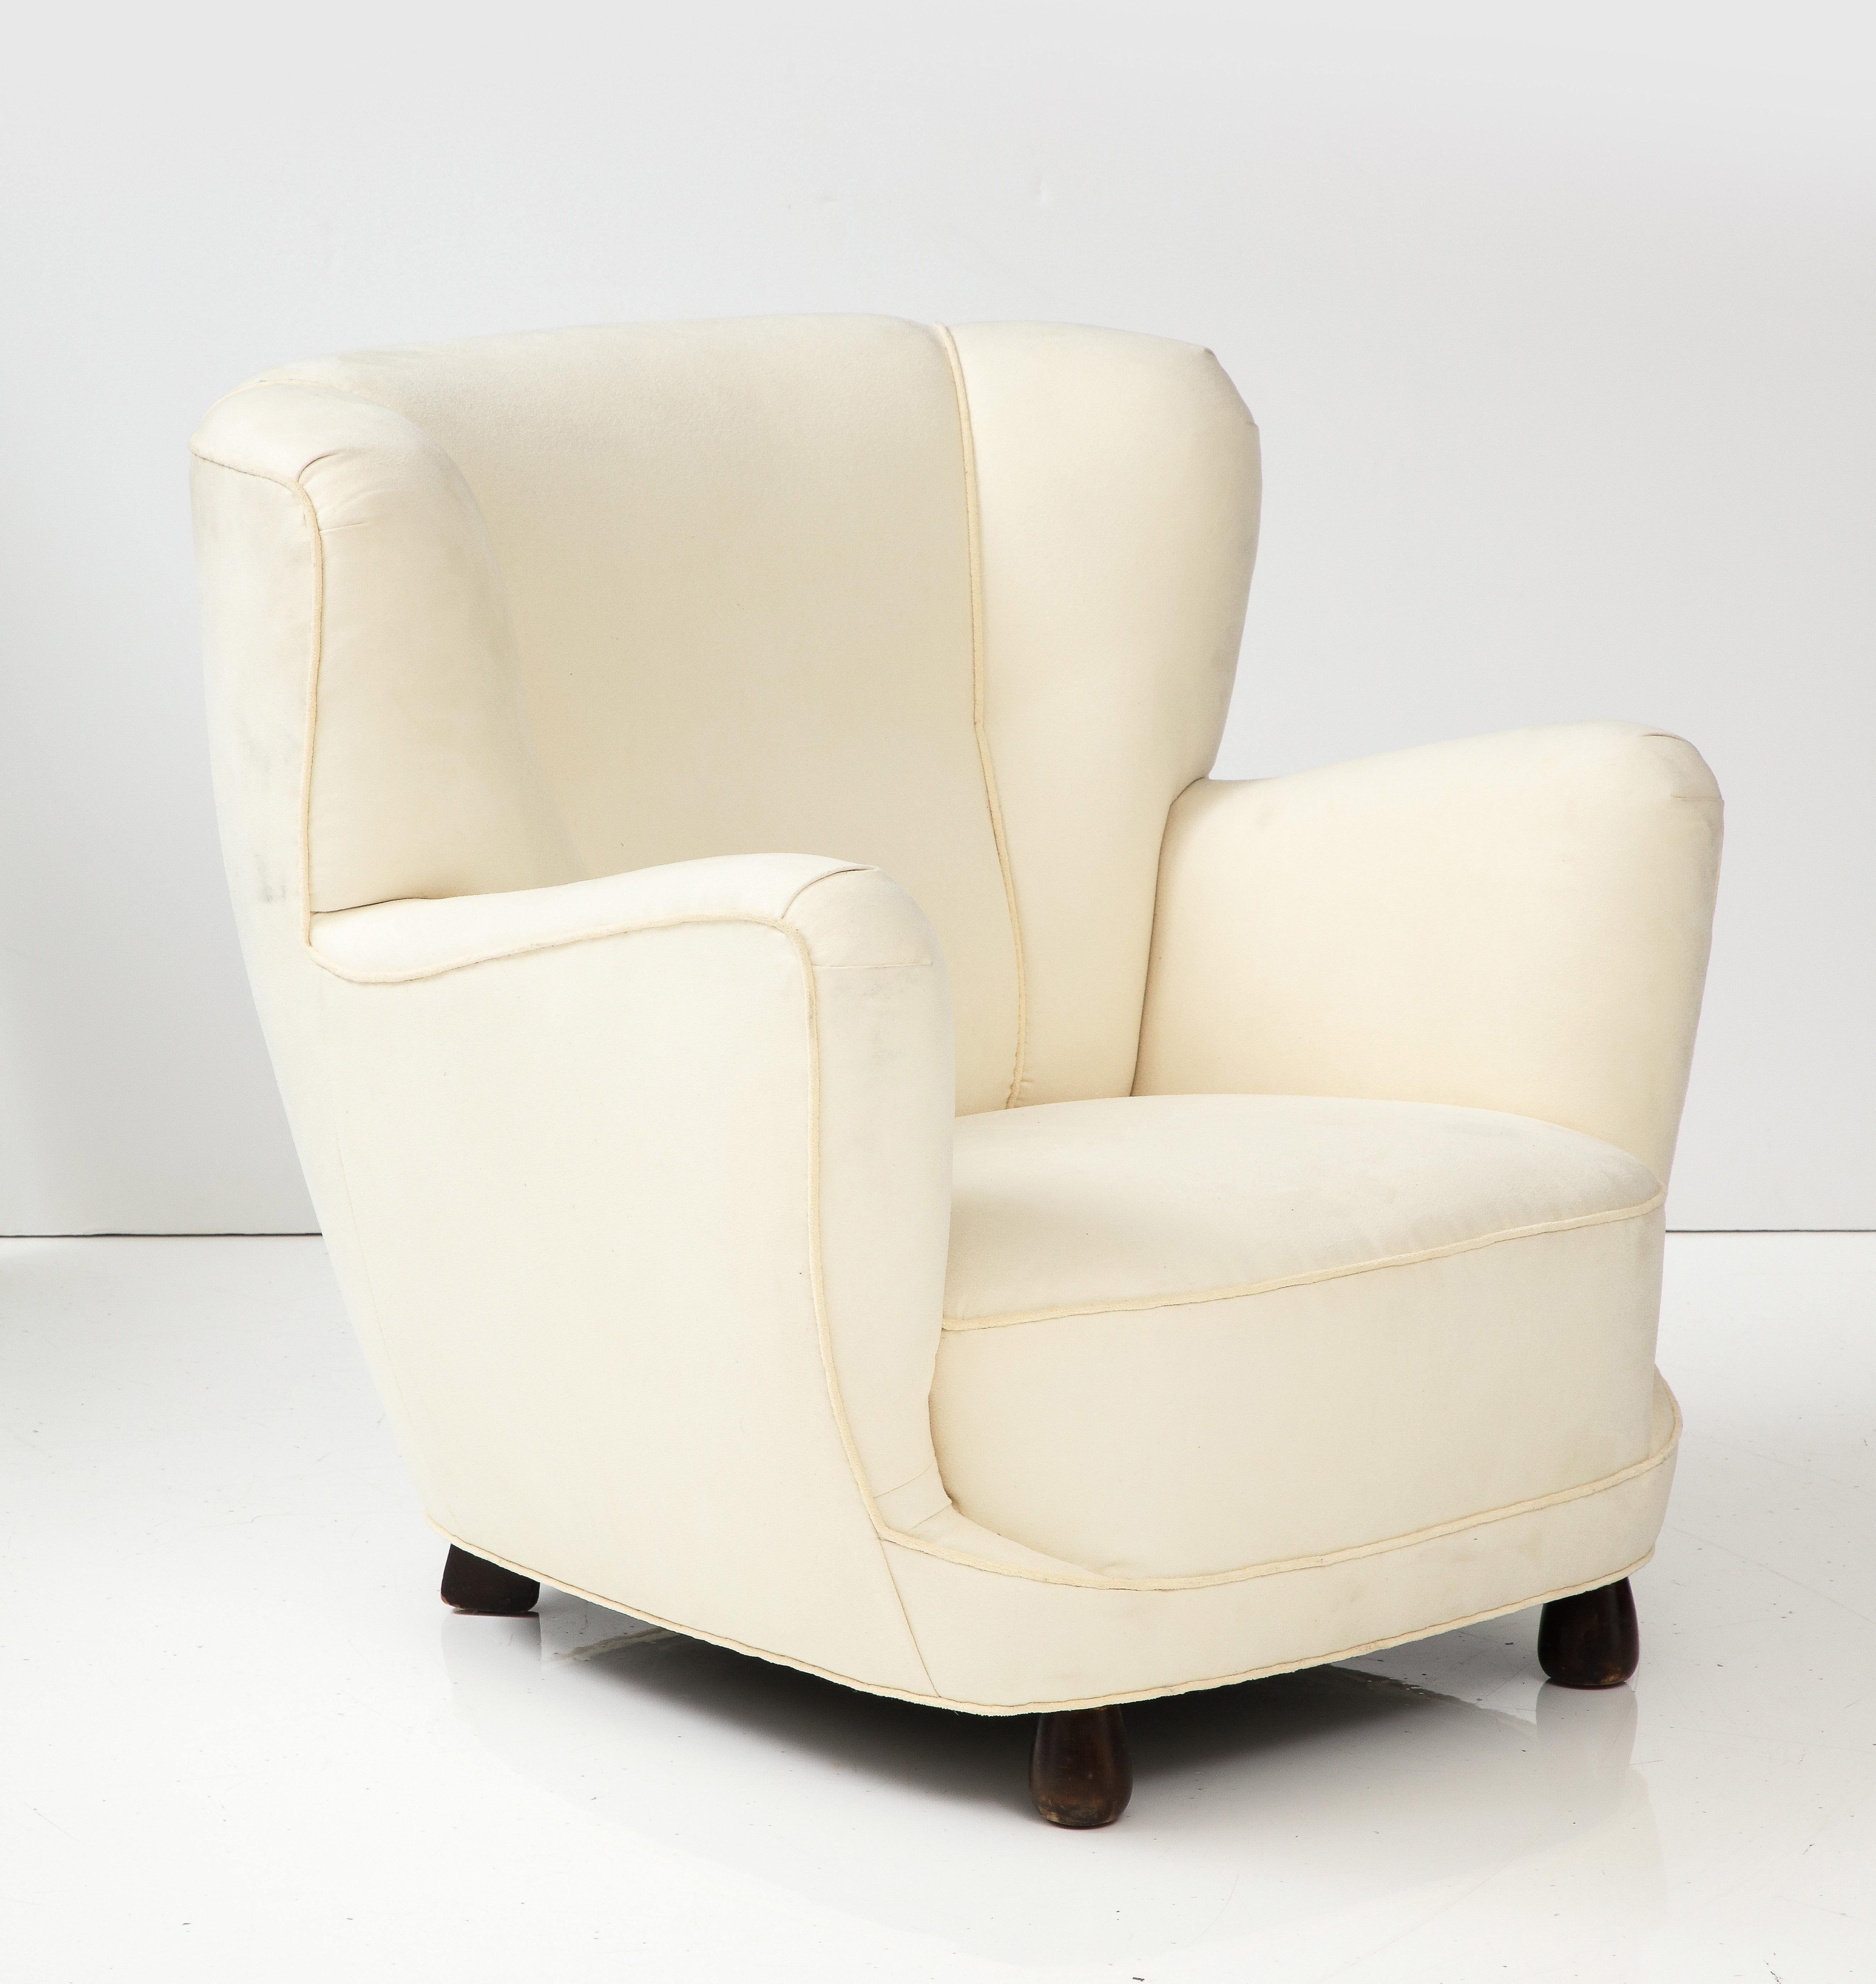 Danish Upholstered Club Chair in Muslin, 1940's For Sale 9